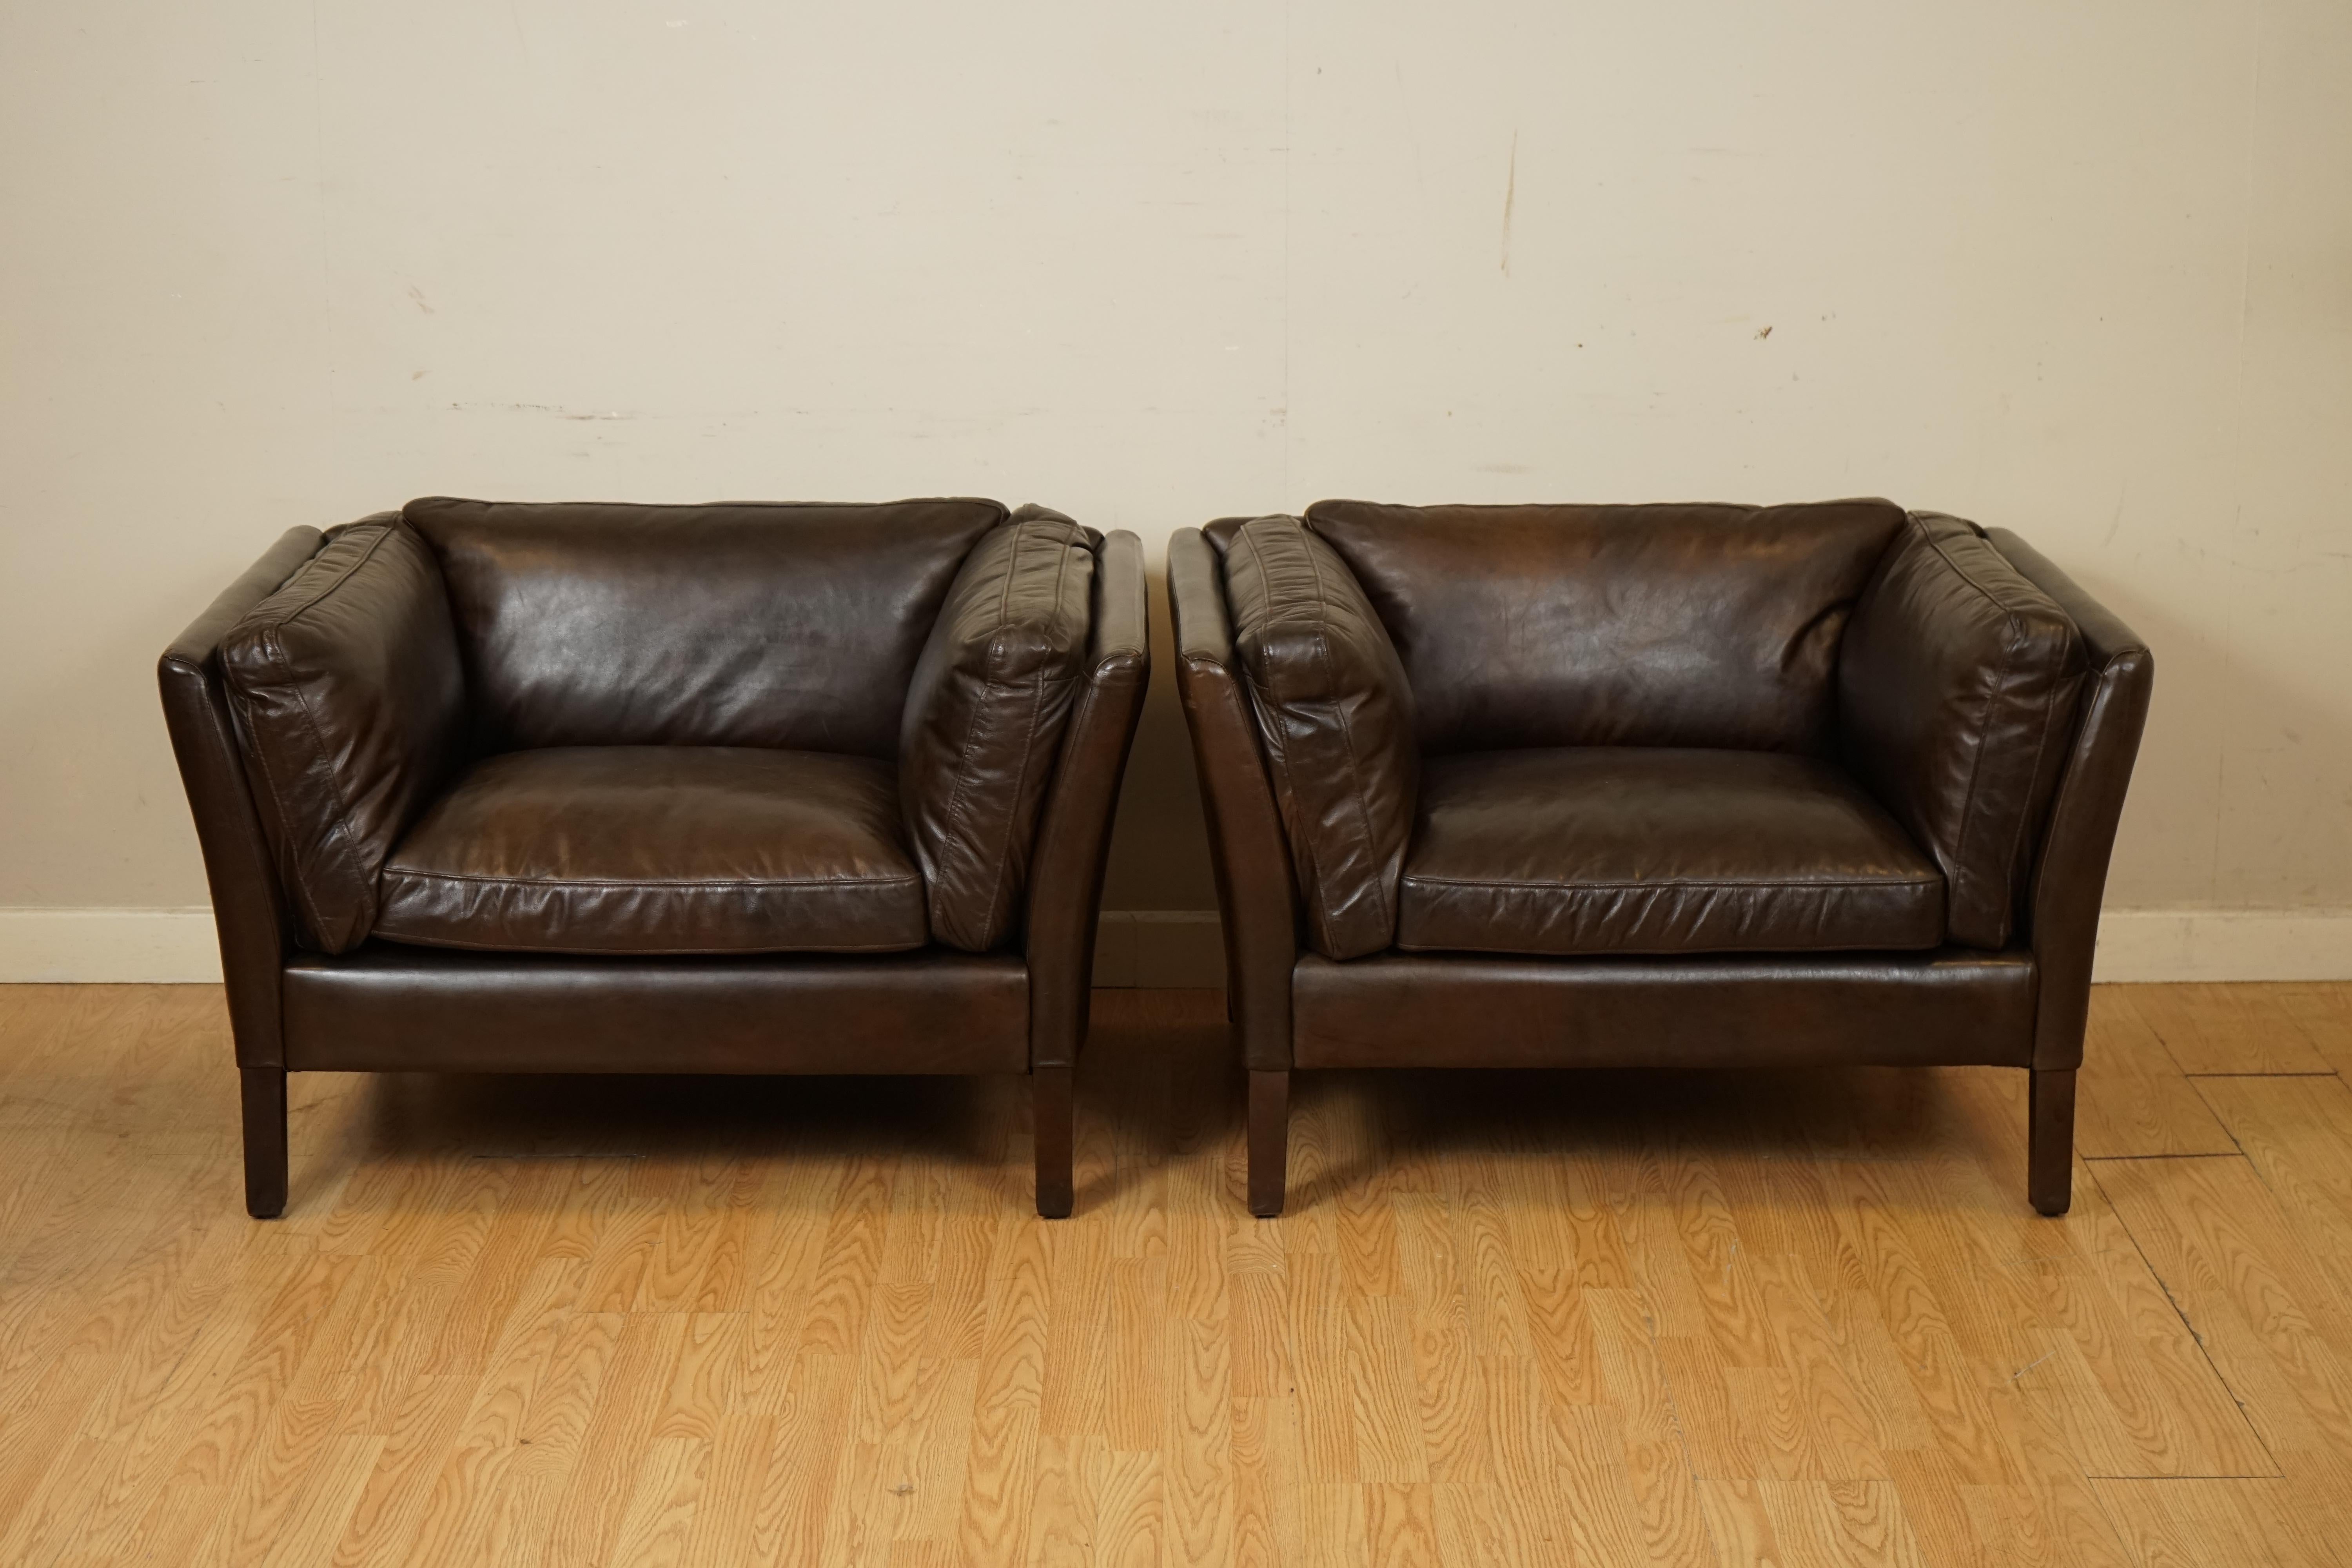 Hand-Crafted Like New Mint Condition Pair of Halo Groucho Leather Armchairs